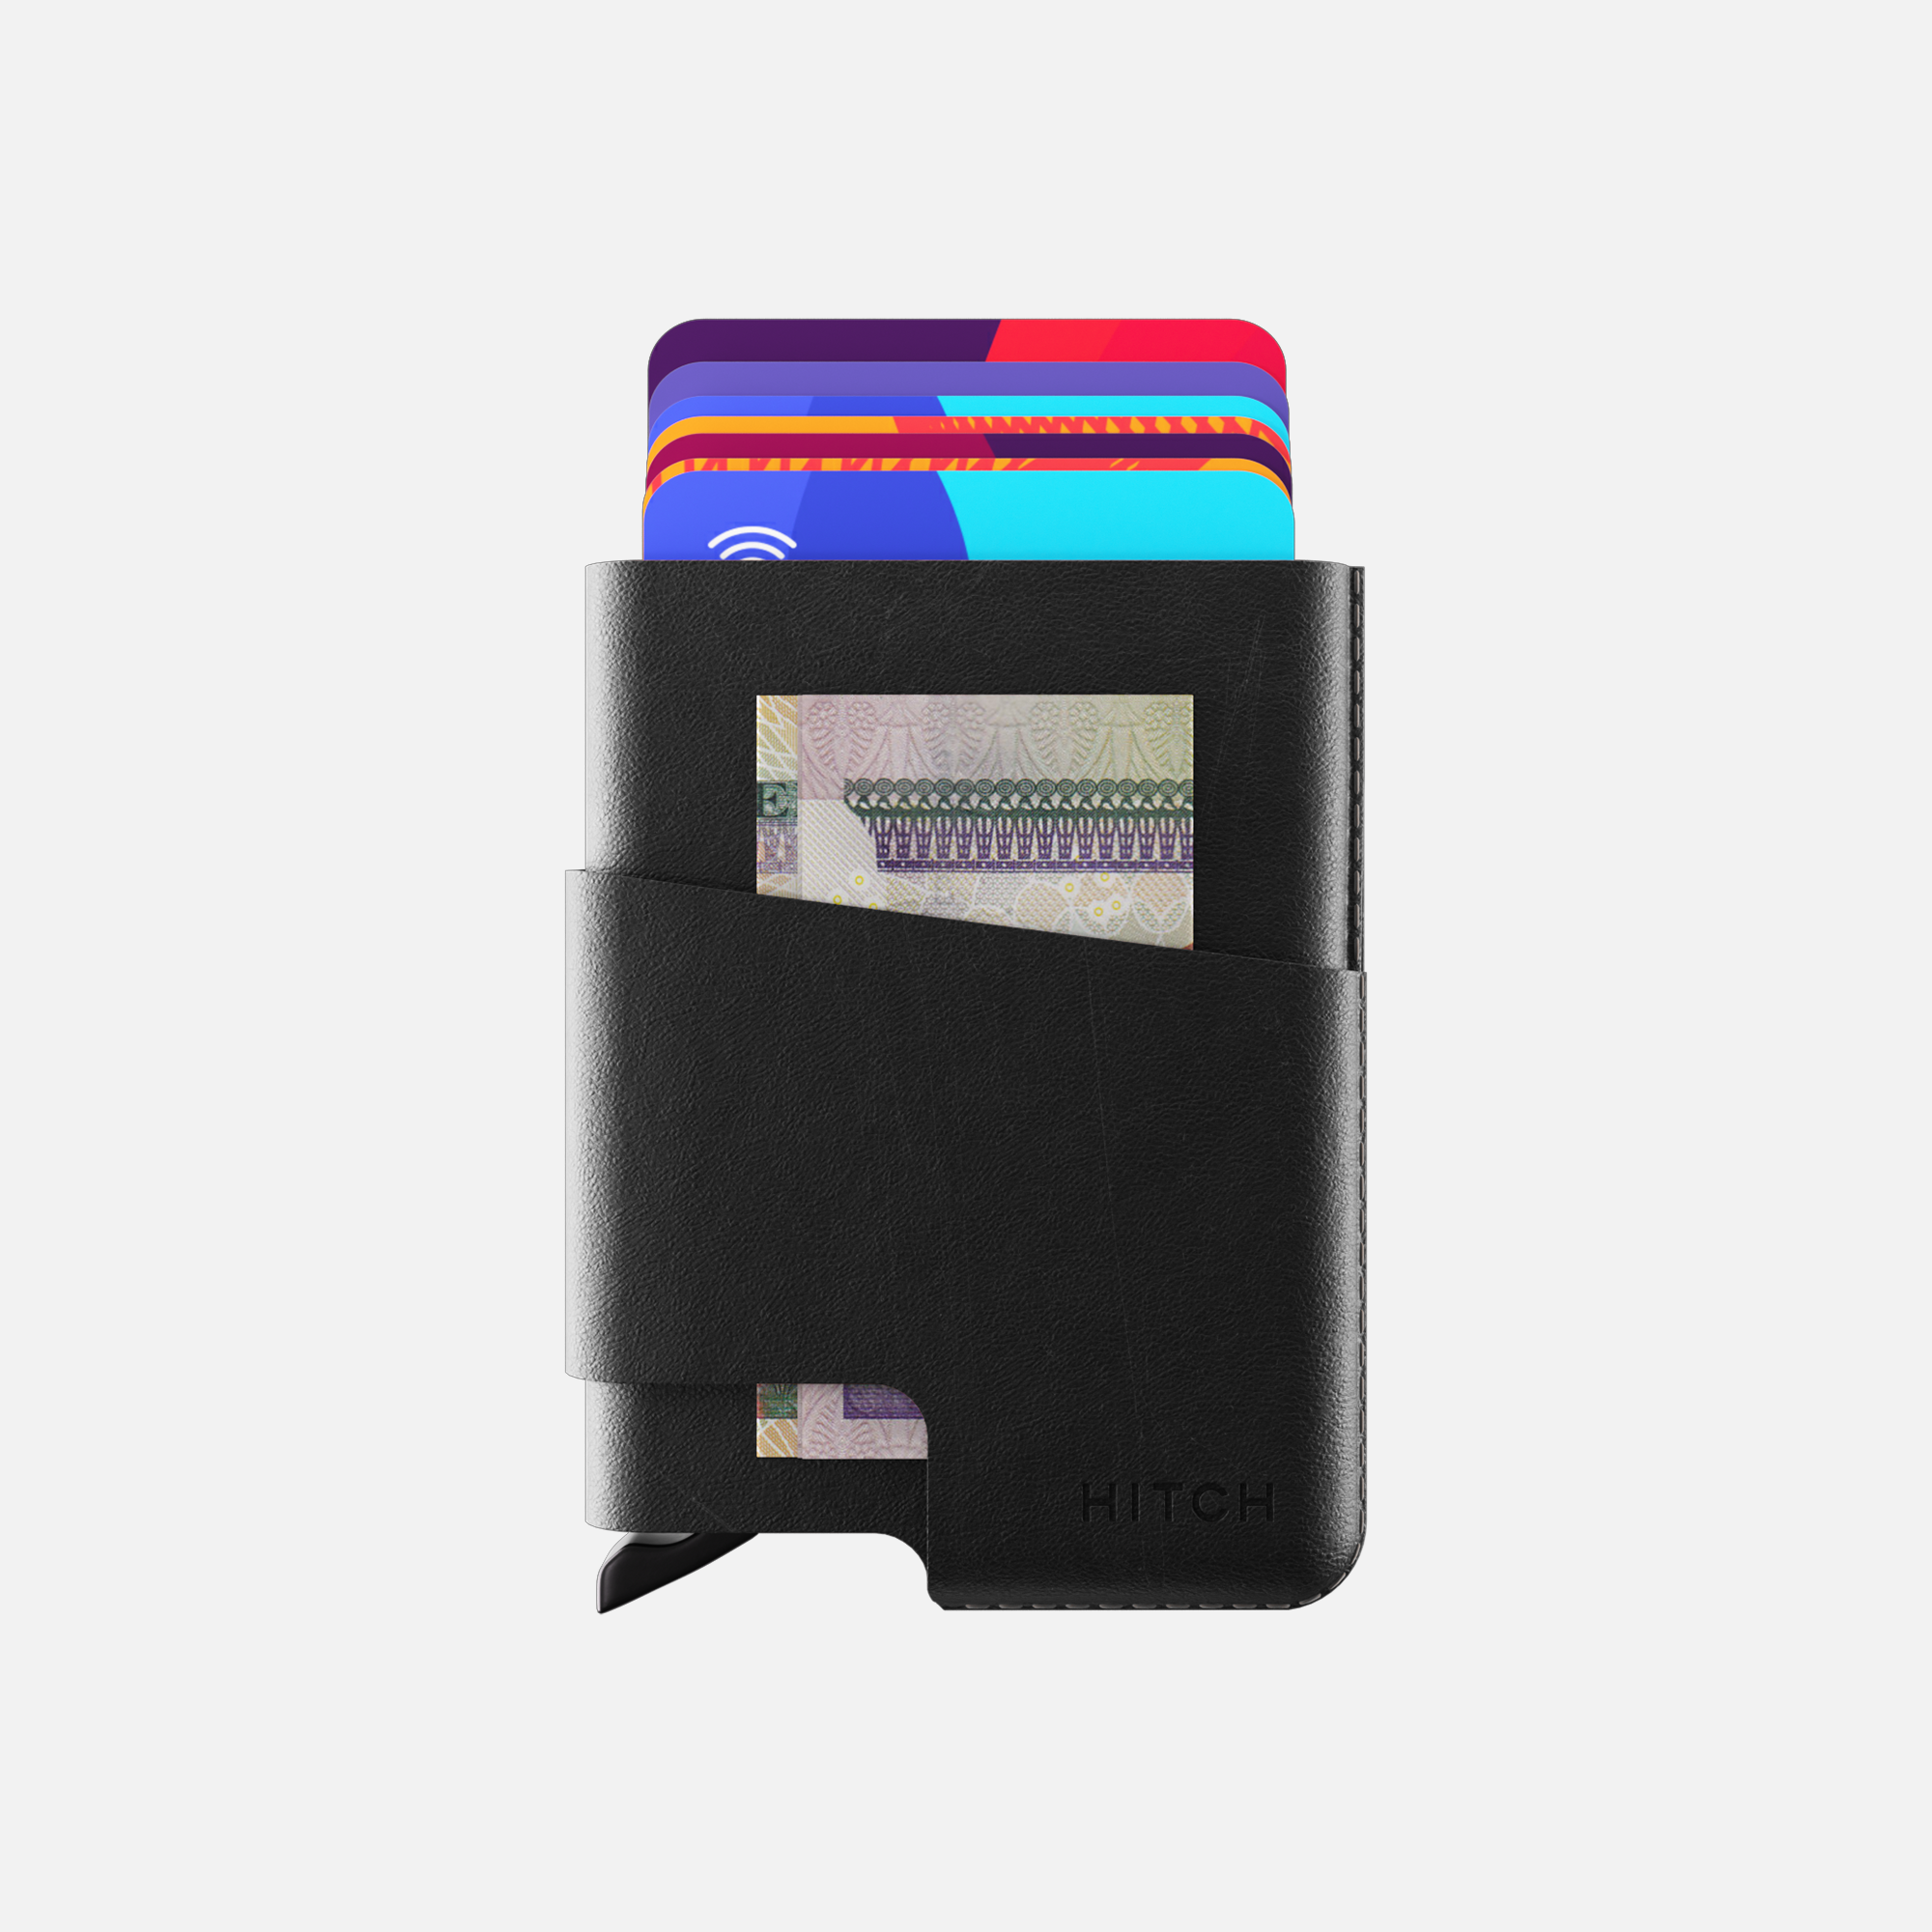 Black minimalist wallet with credit cards and cash sticking out.